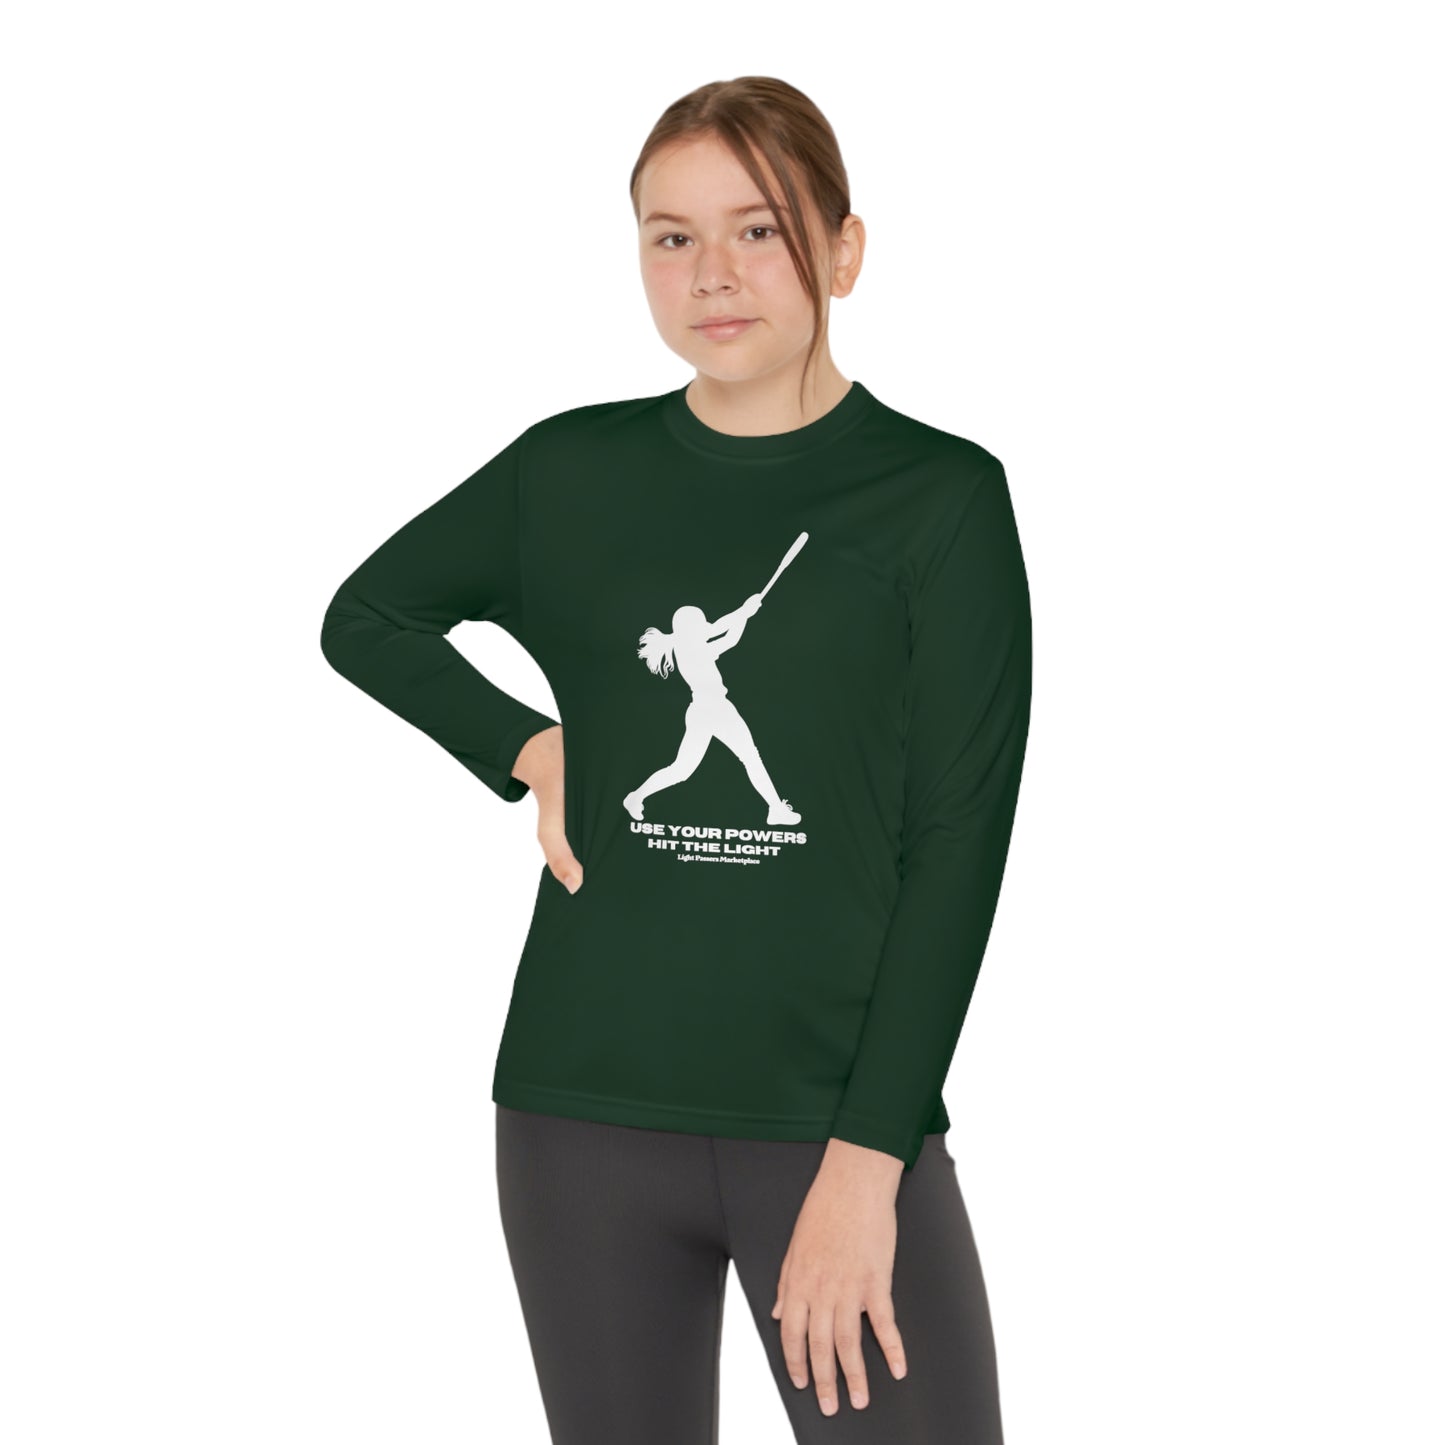 A youth long sleeve tee with a silhouette of a girl swinging a bat, made of moisture-wicking polyester. Lightweight, breathable, and ideal for active kids.